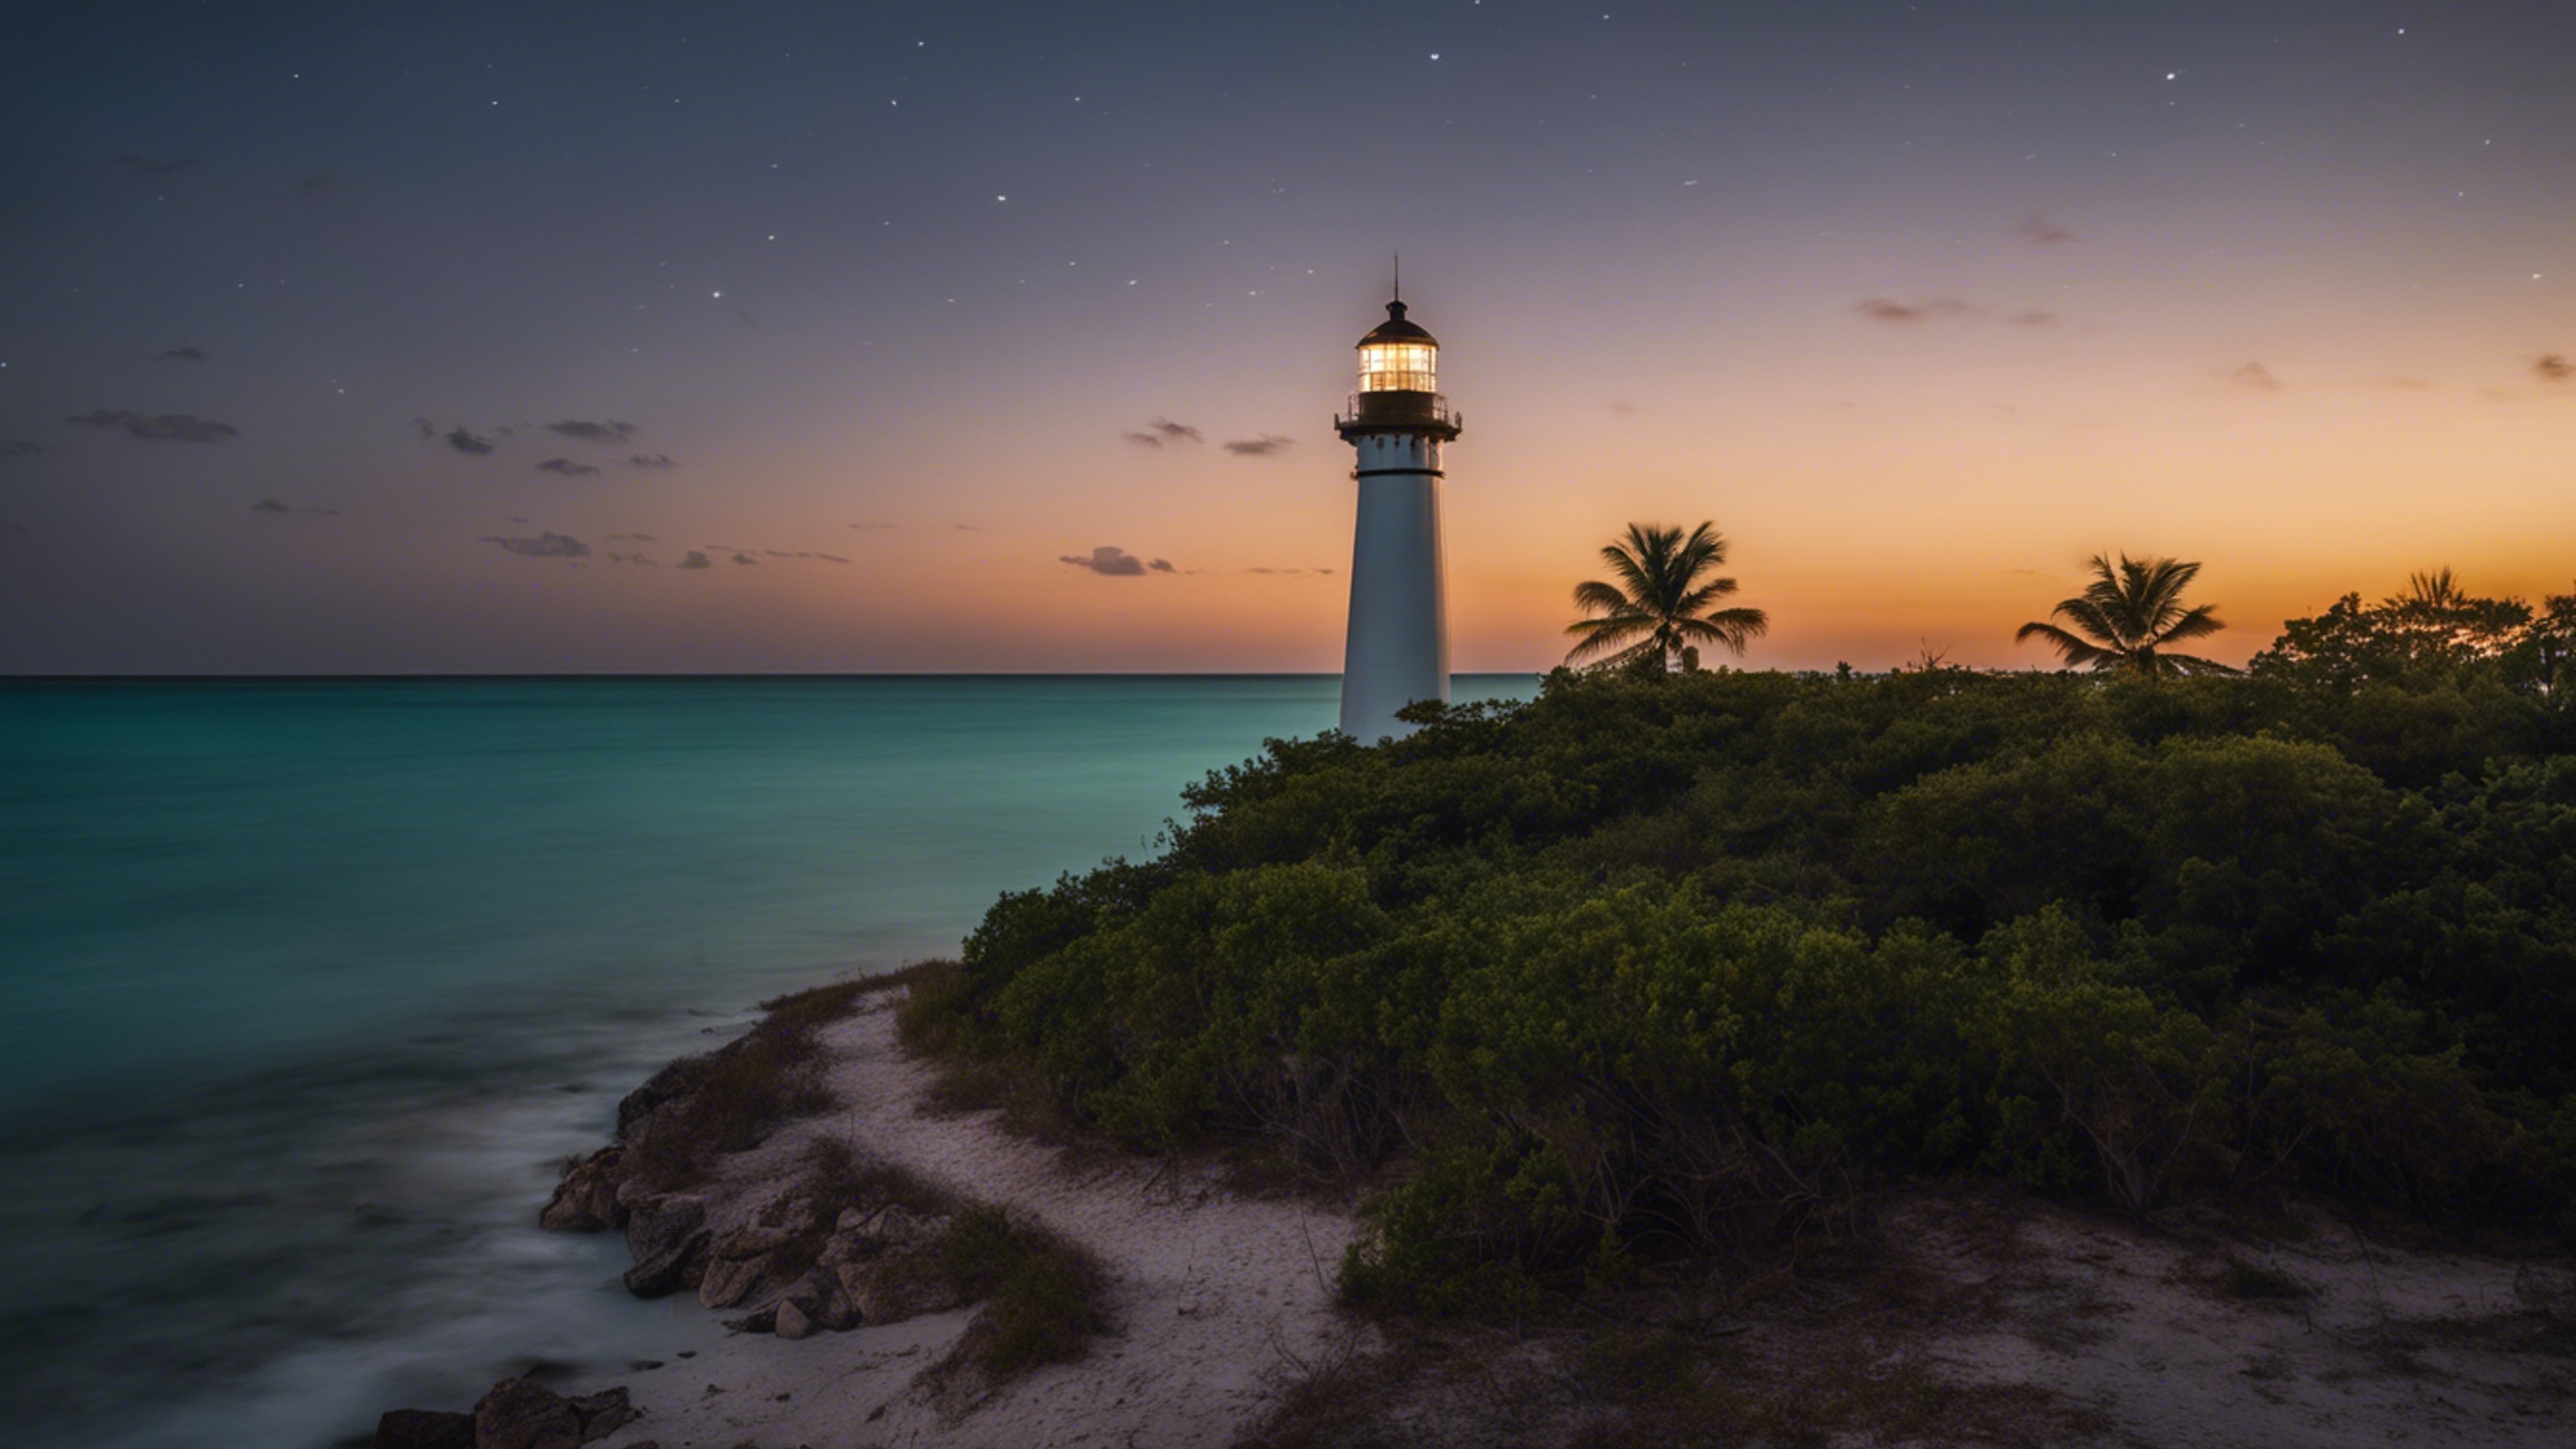 A night shot of an historic lighthouse in Key Biscayne, with the beam of light cutting through the darkness. טפט[4d5993bb763c4a90b239]